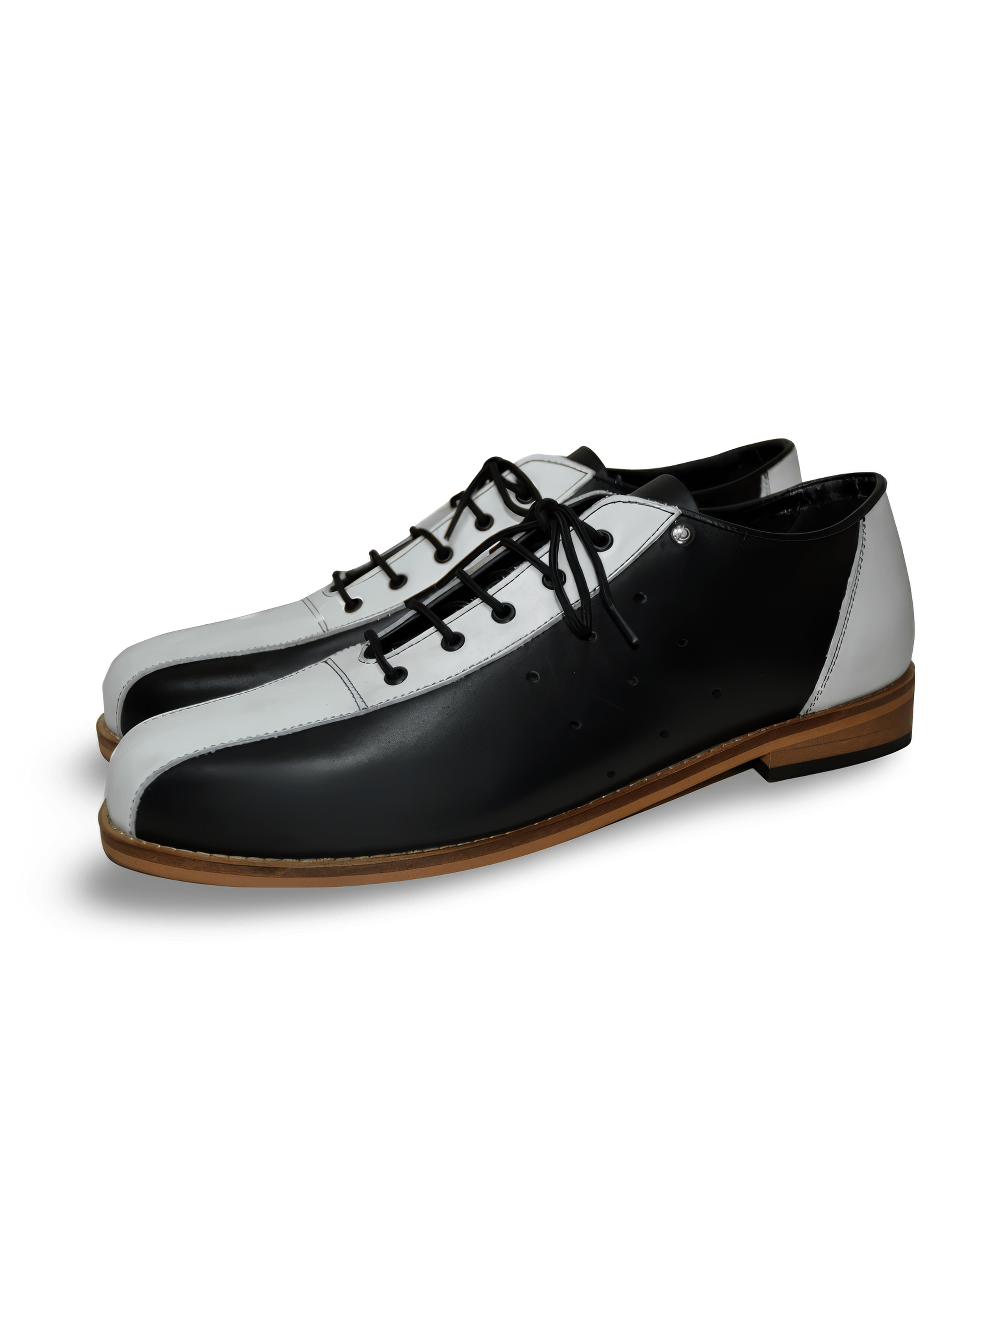 Black and White Leather Lace-Up Shoes with Neolite Sole